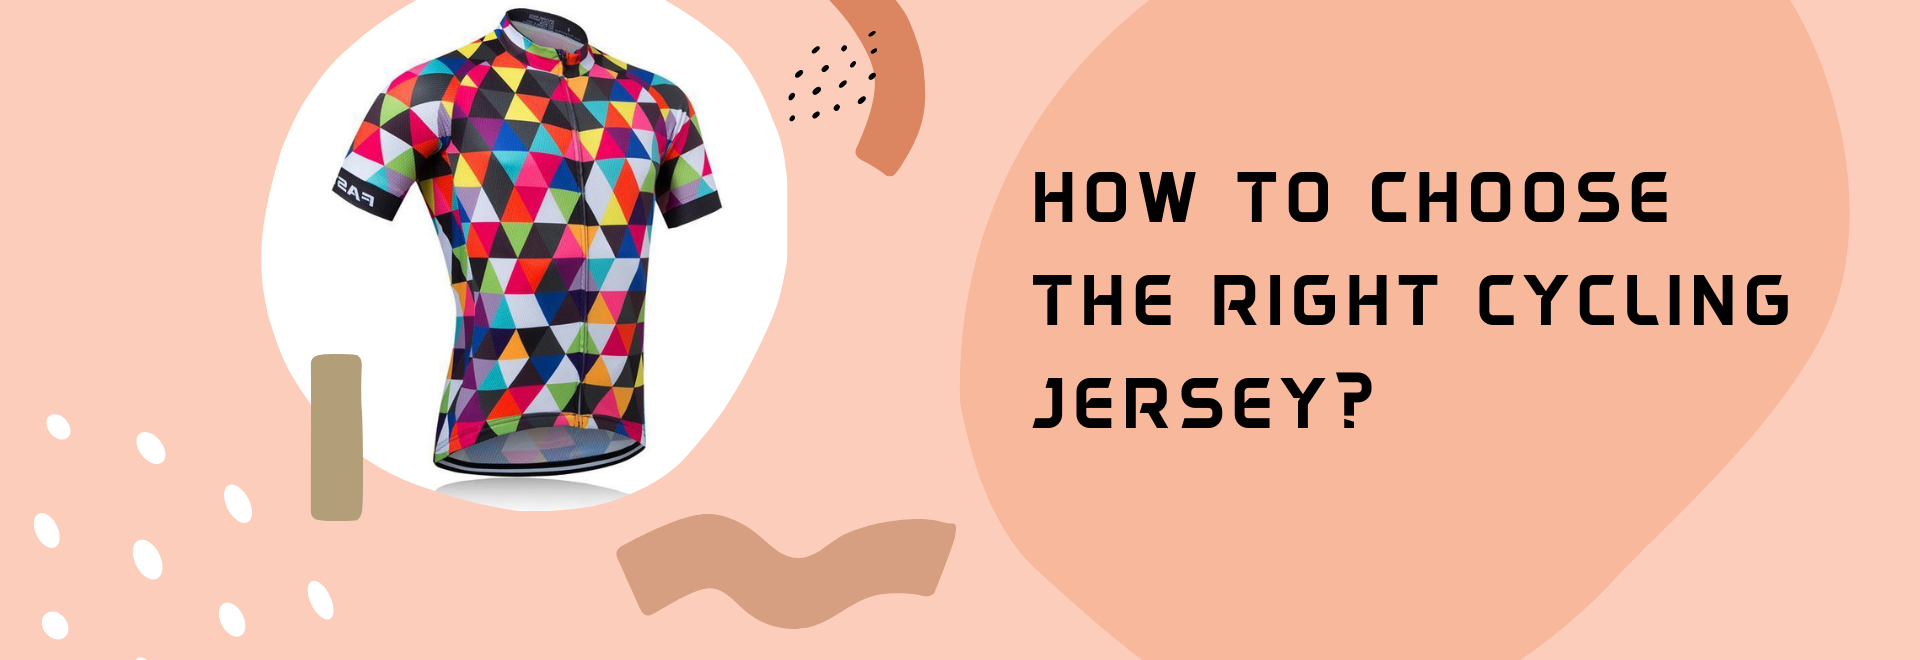 How to choose the right cycling jersey - a guide for cyclists